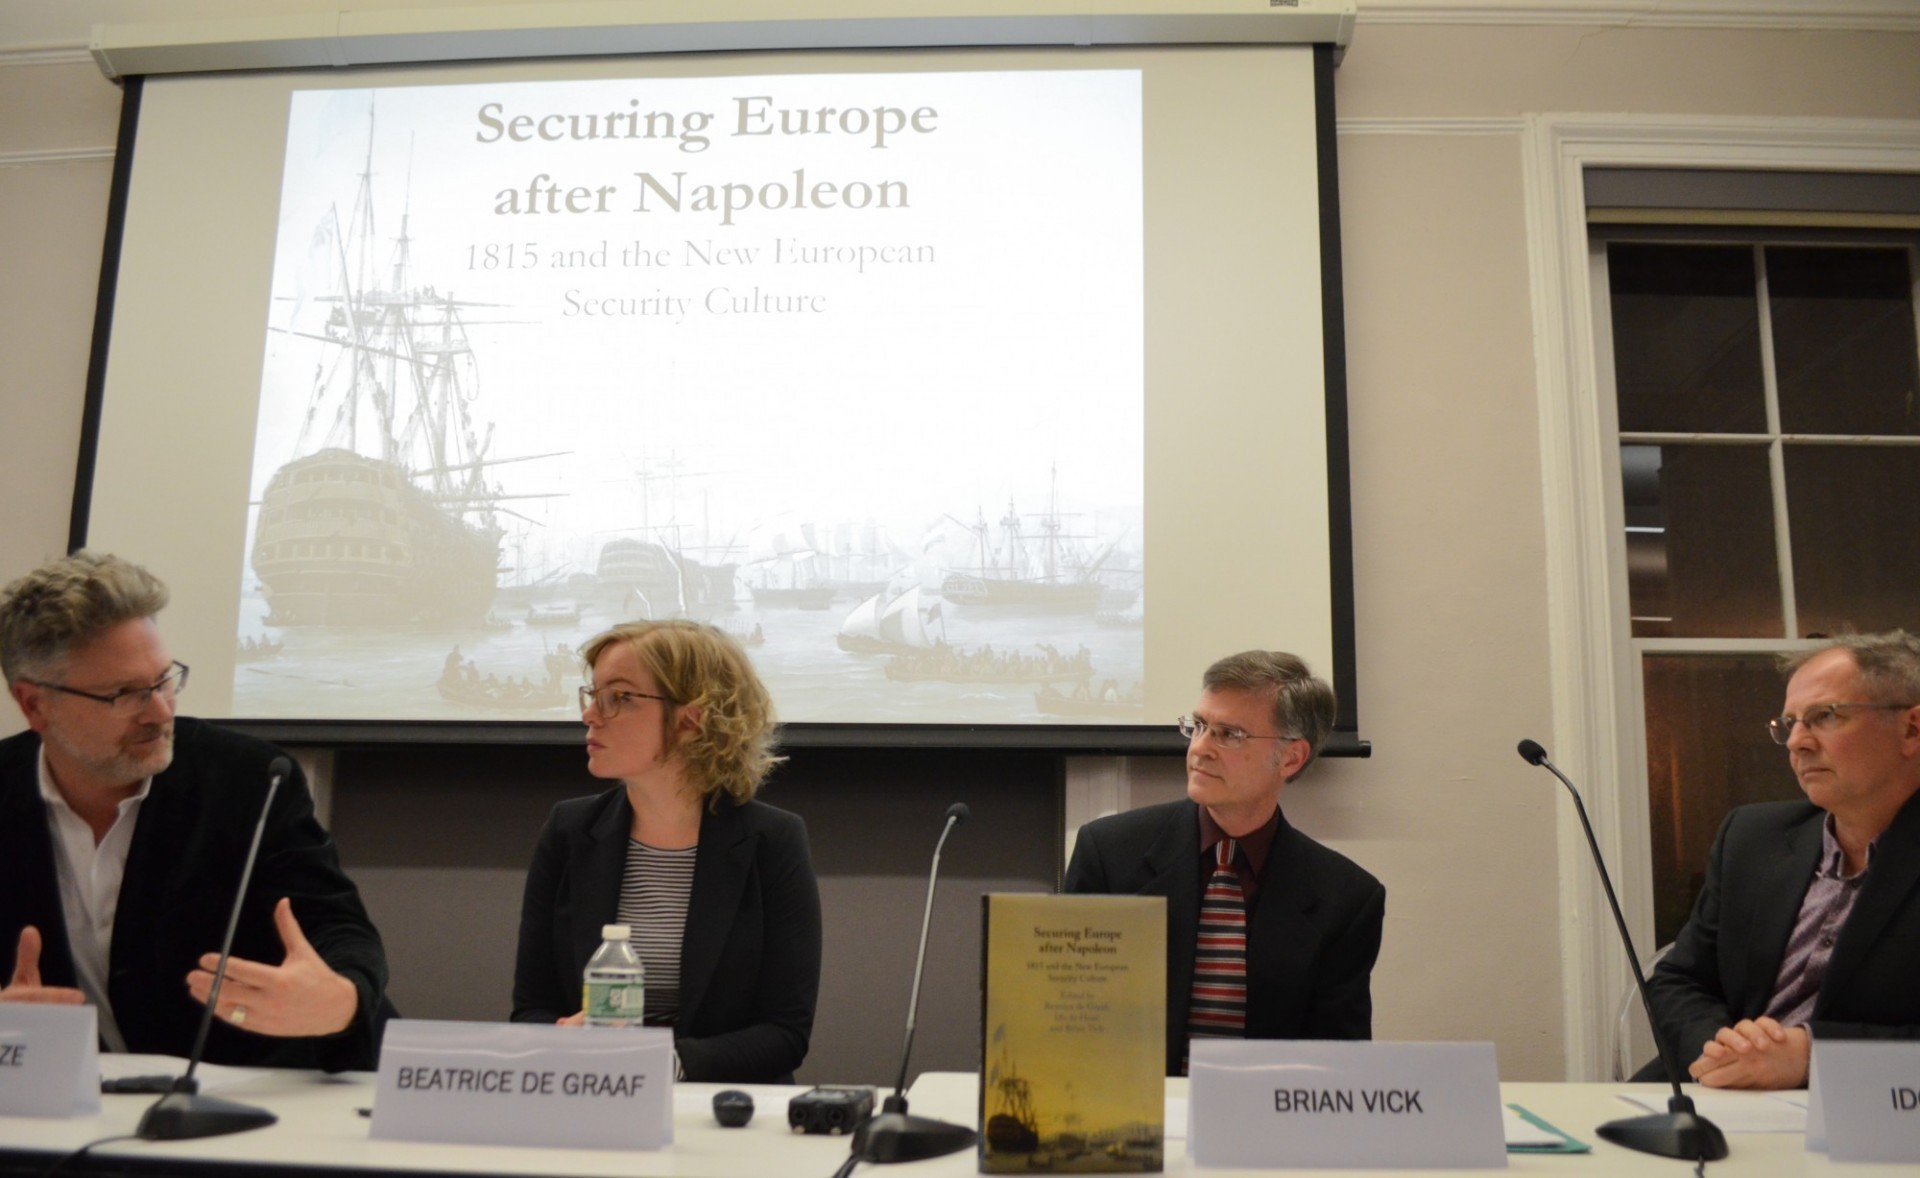 Event Recap: "Securing Europe after Napoleon - 1815 and the New European Security Culture"